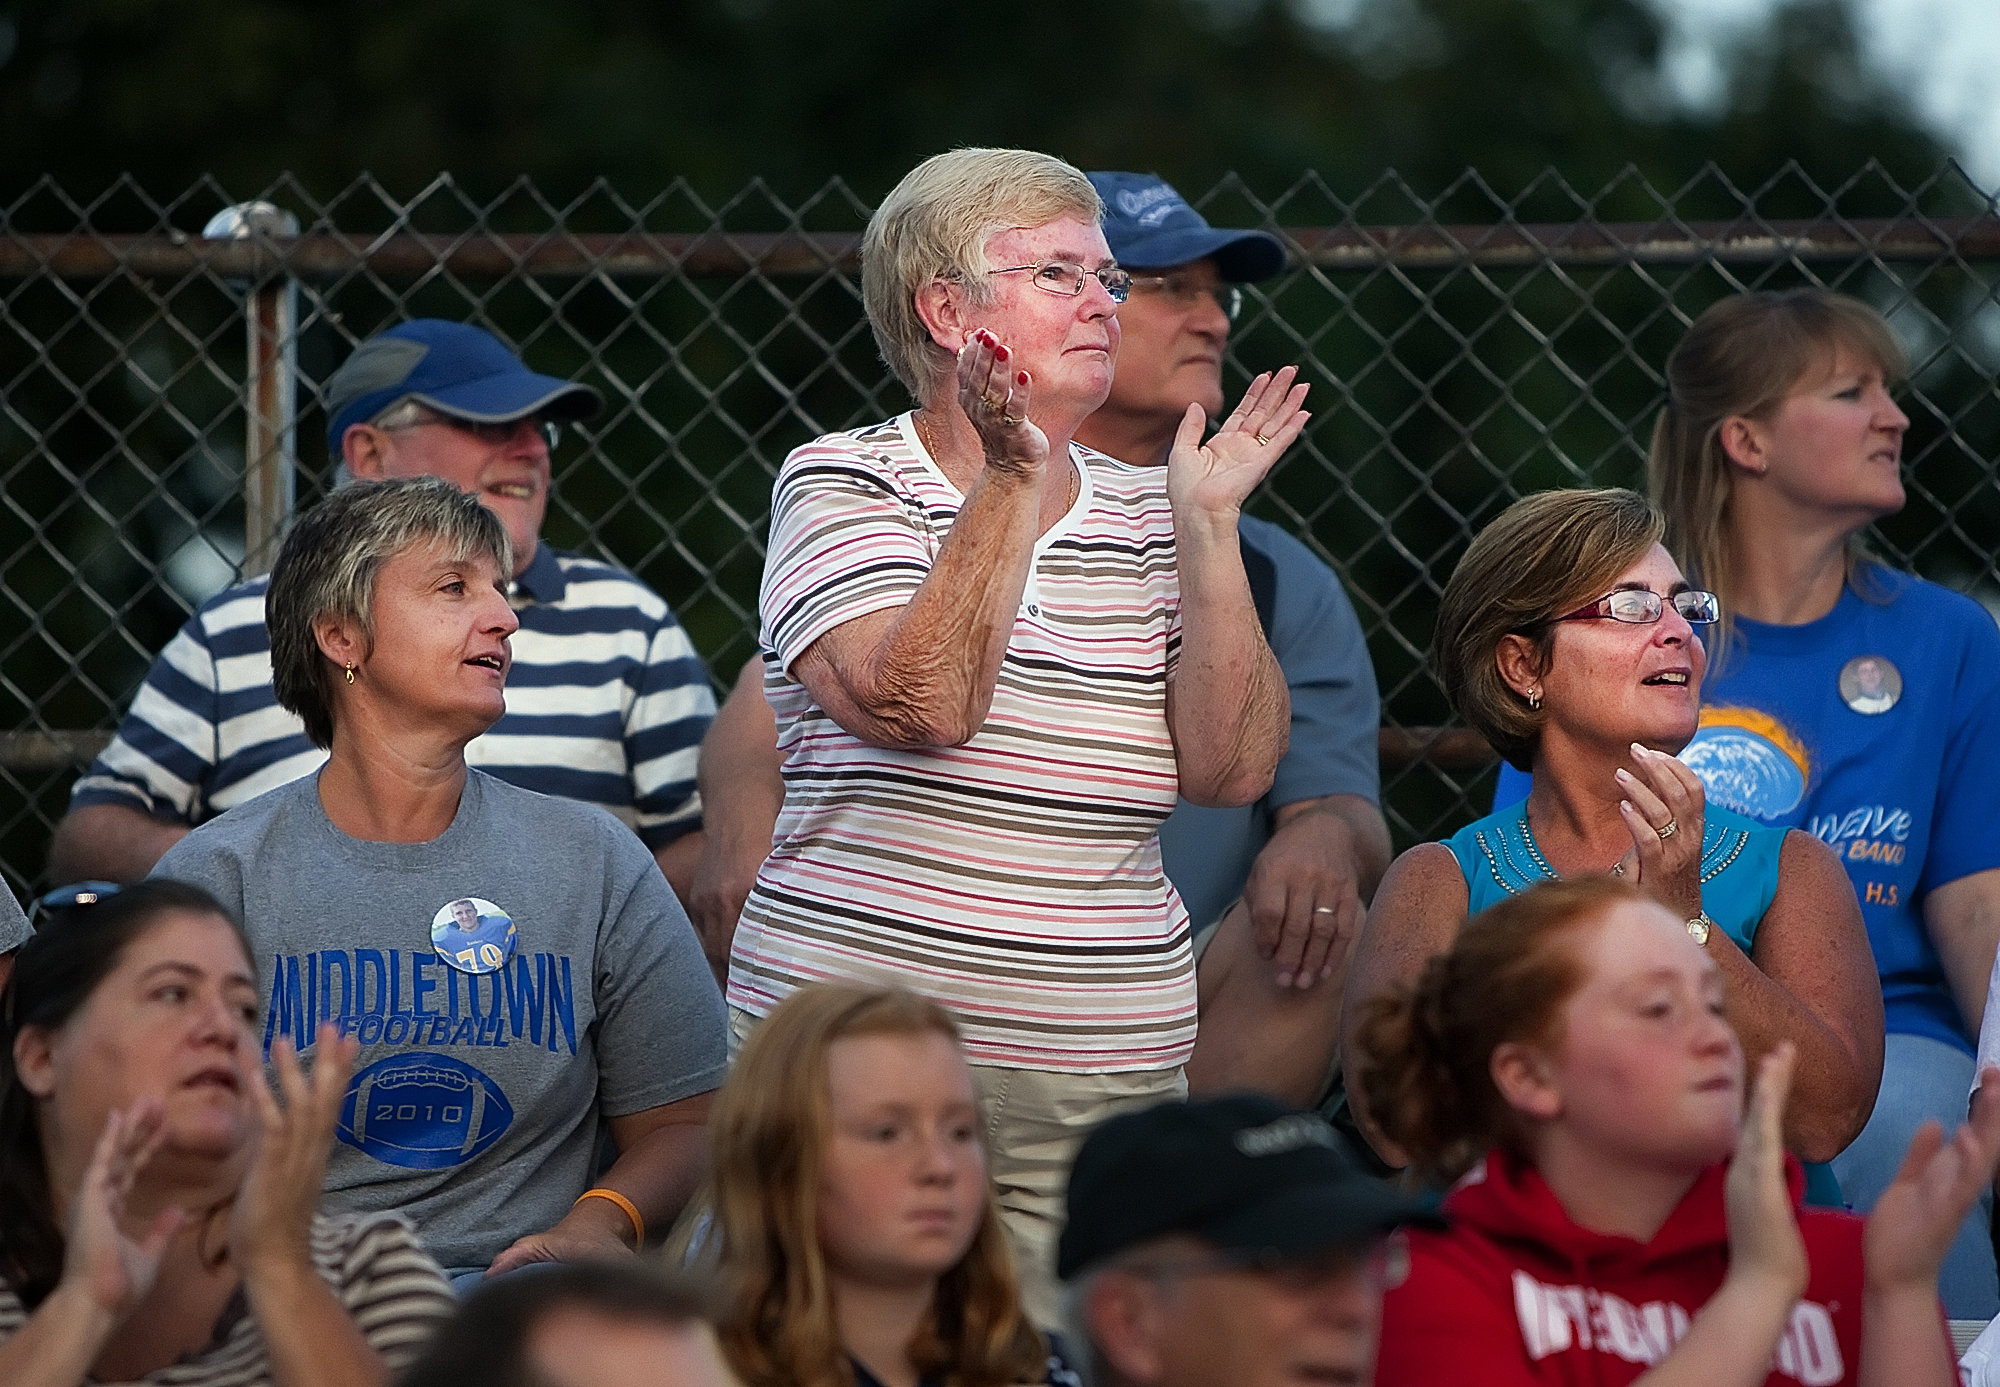 Parents and adult fans: the biggest challenge facing high school sports today